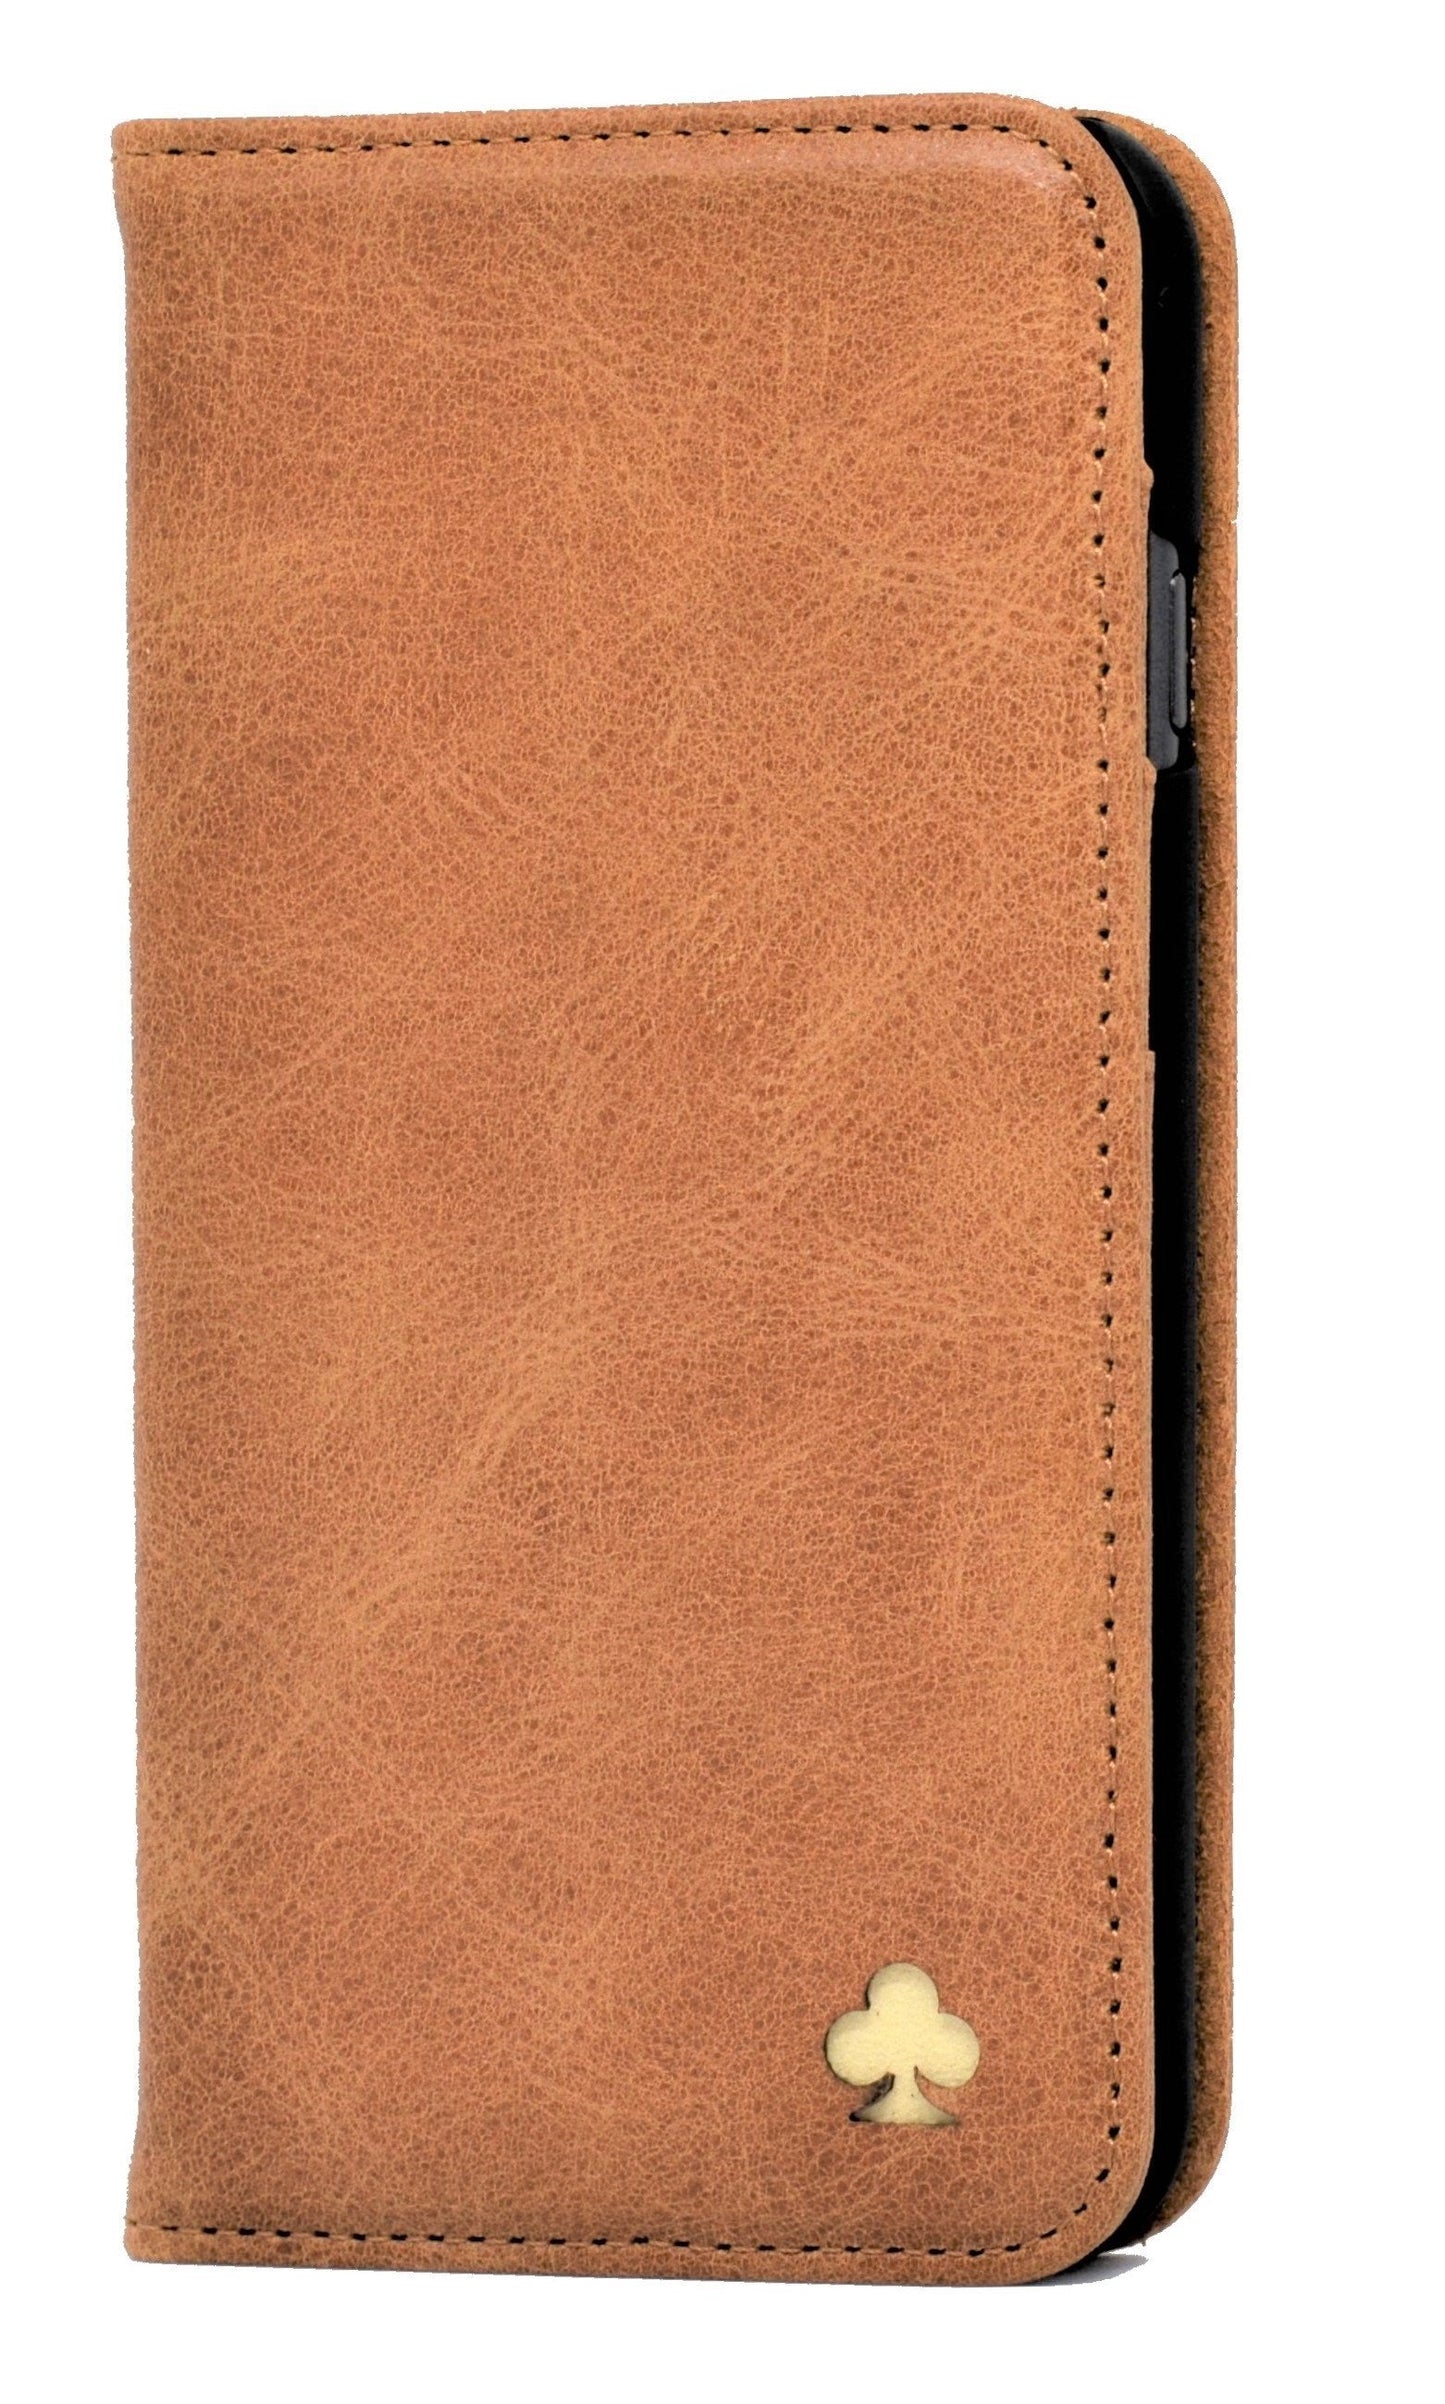 iPhone 14 Pro Leather Case. Premium Slim Genuine Leather Stand Case/Cover/Wallet (Tan)